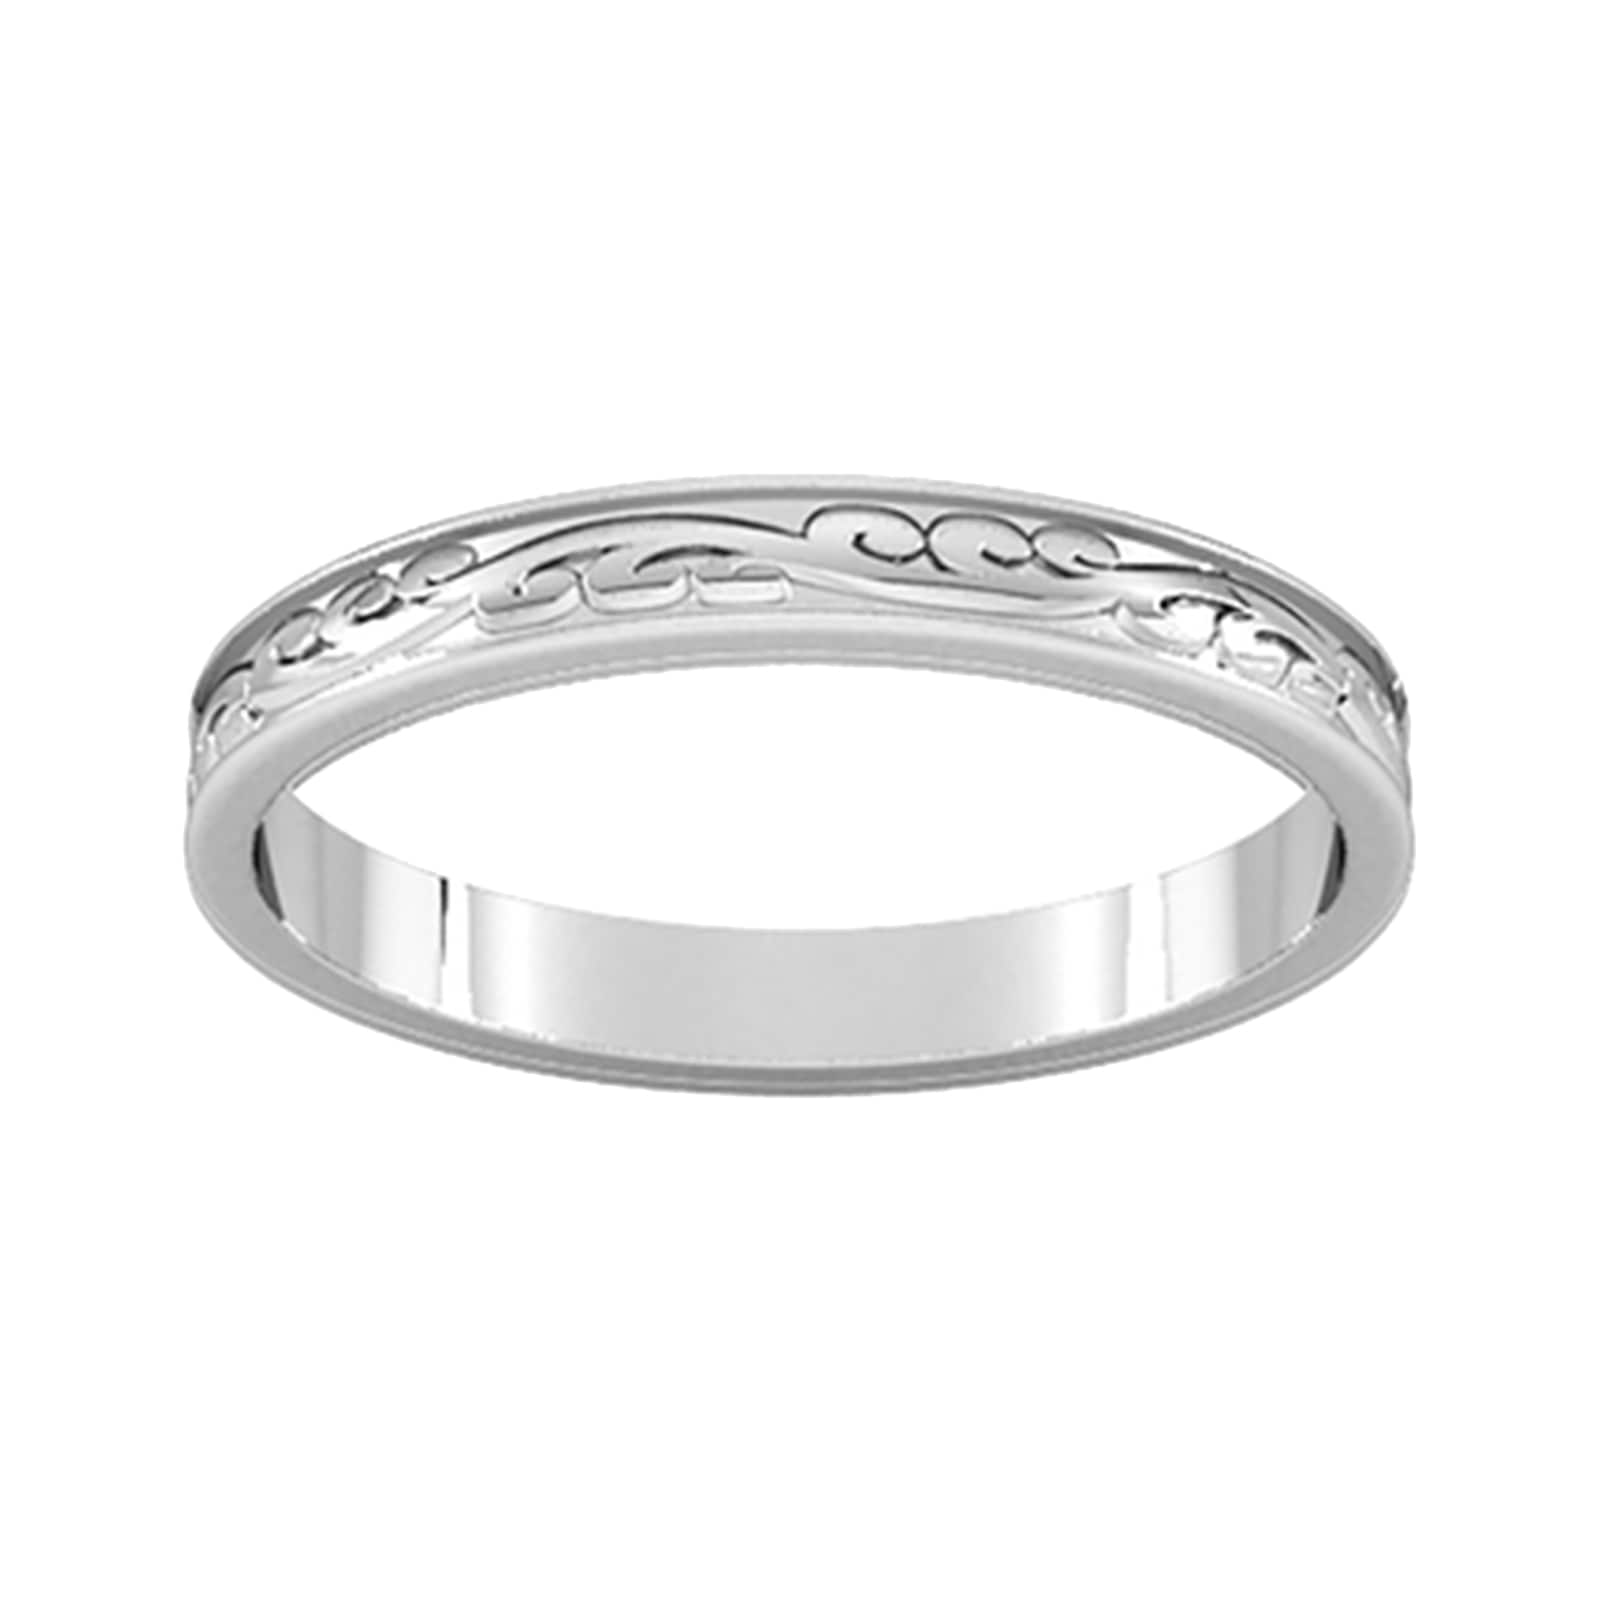 2.5mm Hand Engraved Wedding Ring In 18 Carat White Gold - Ring Size H